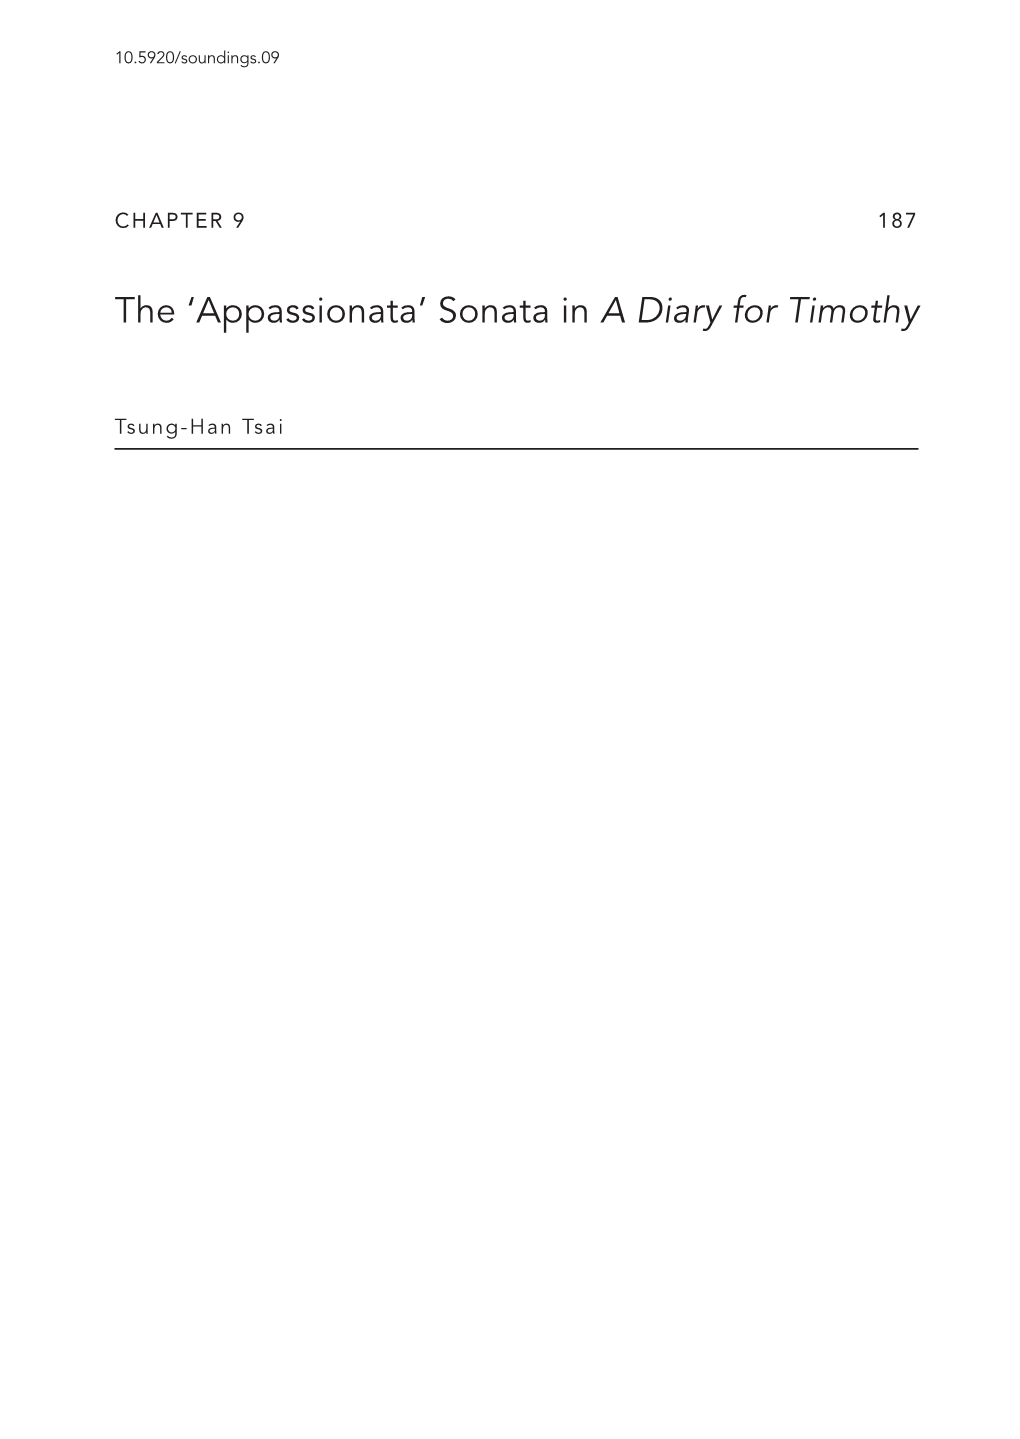 The 'Appassionata' Sonata in a Diary for Timothy